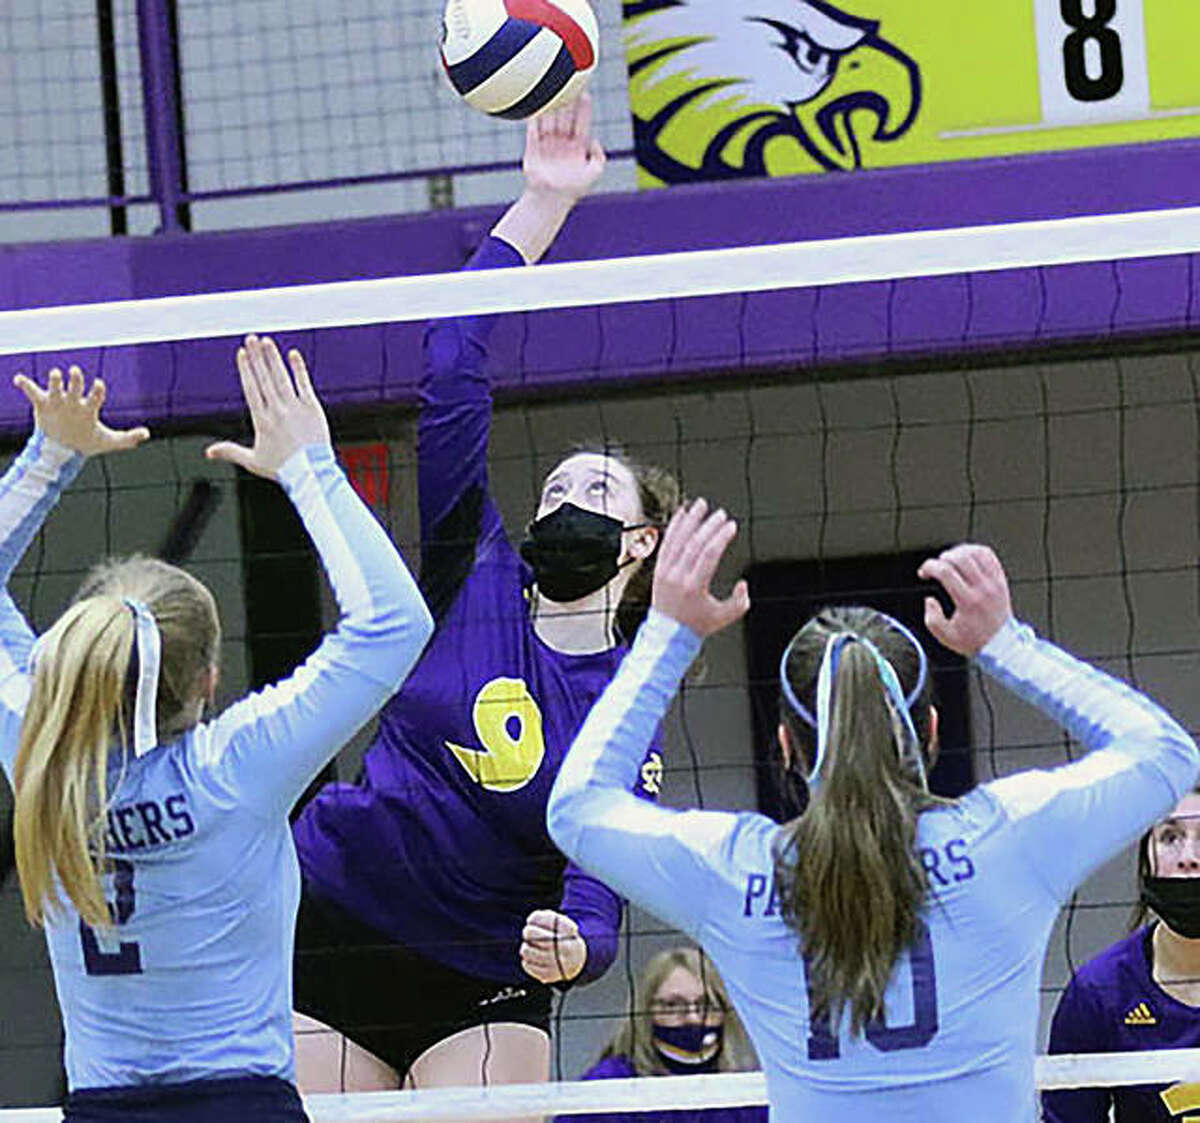 CM’s Lauren Dunlap (9) attacks before Jersey’s Sally Hudson and Caroline Gibson (10) can put up a block in a March 18 volleyball match in Bethalto. Volleyball teams, as well as athletes playing other indoor fall sports, will be required to wear masks temporarily, according to the IHSA.